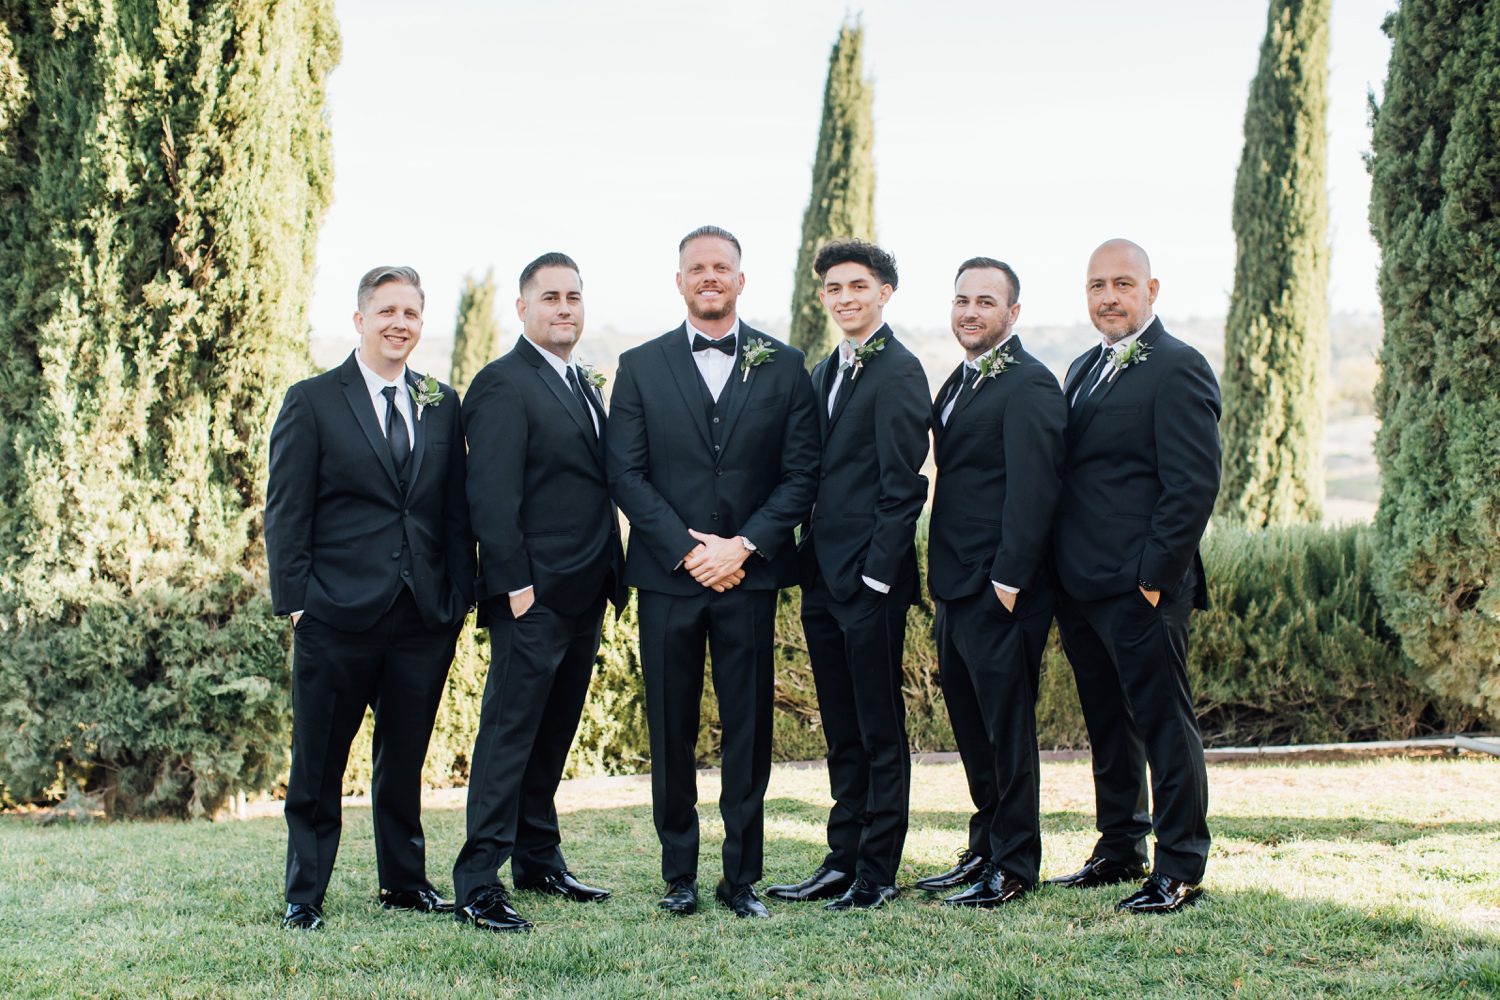 Groom standing with his groomsmen in matching suits